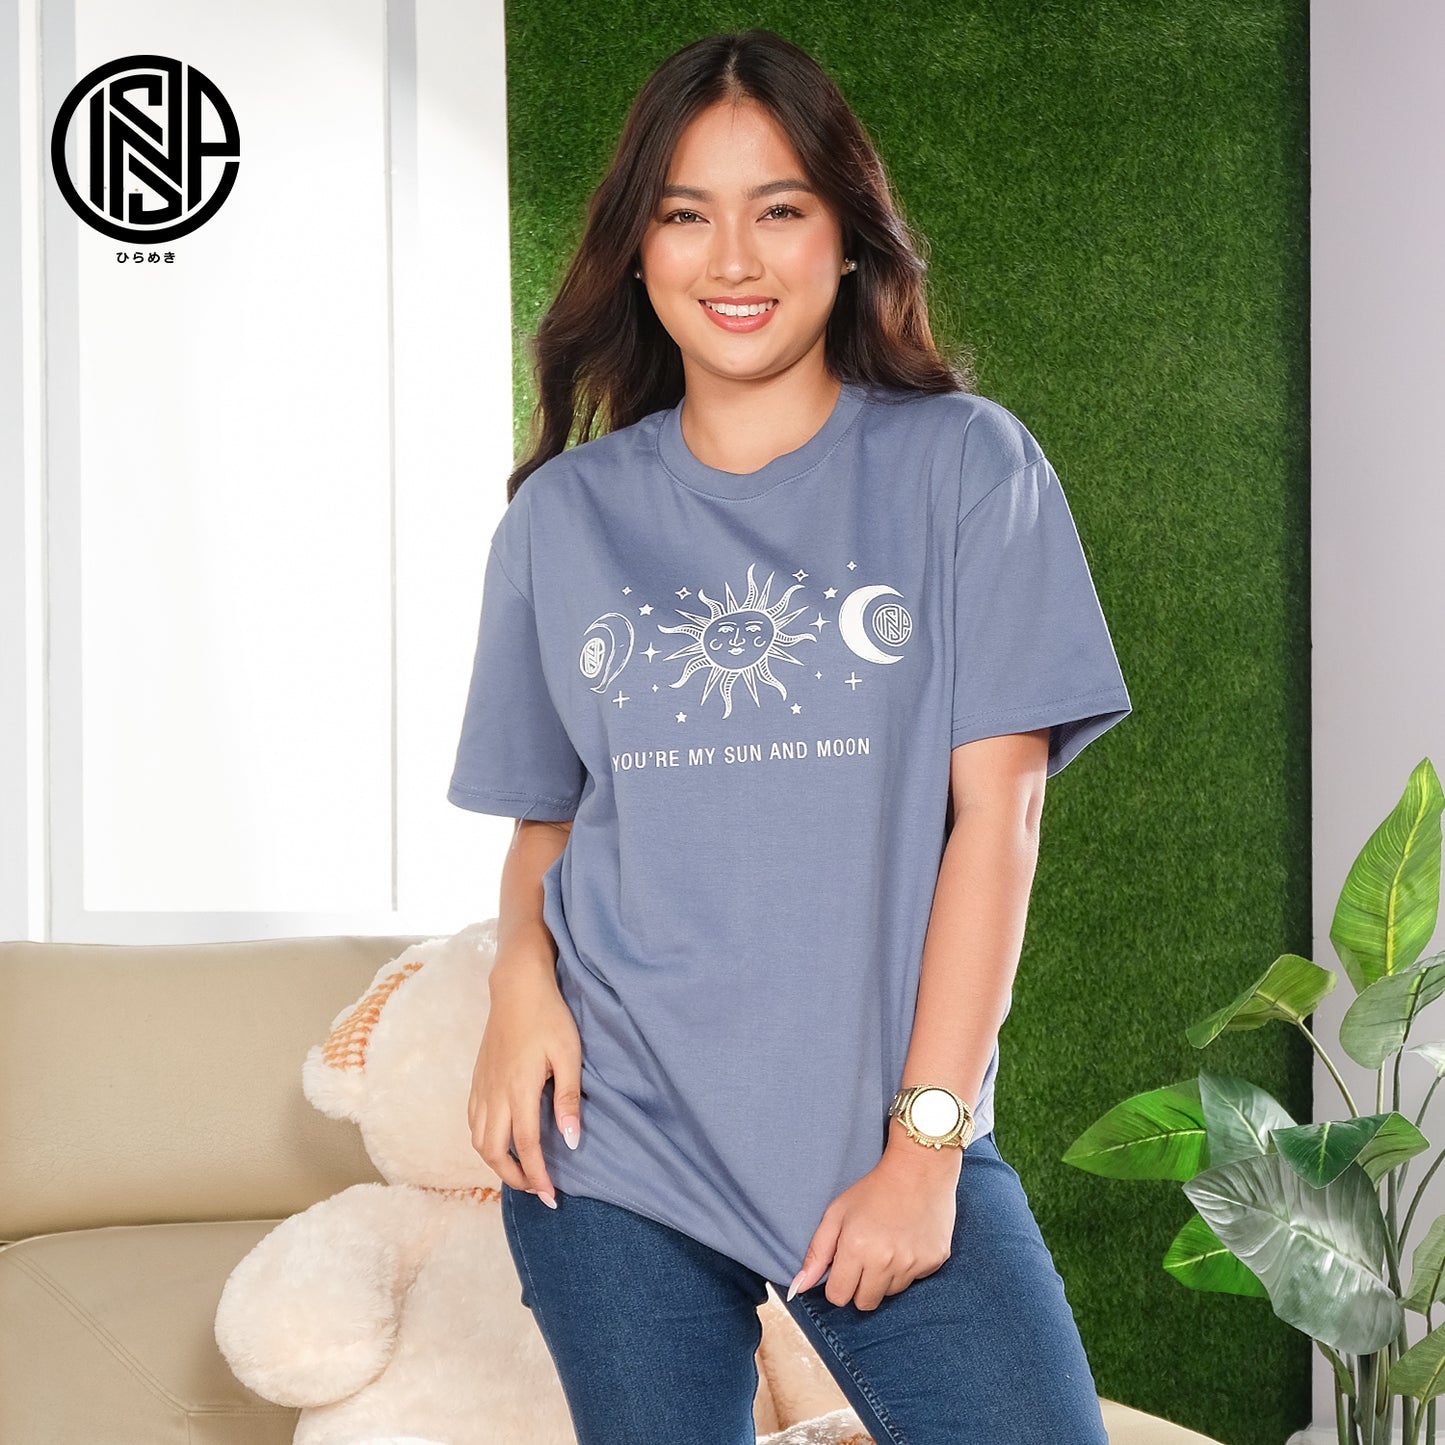 INSPI Tees Celestial Tshirt for Men Aesthetic Galaxy Crew Neck Tops for Women My Sun And Moon Tee